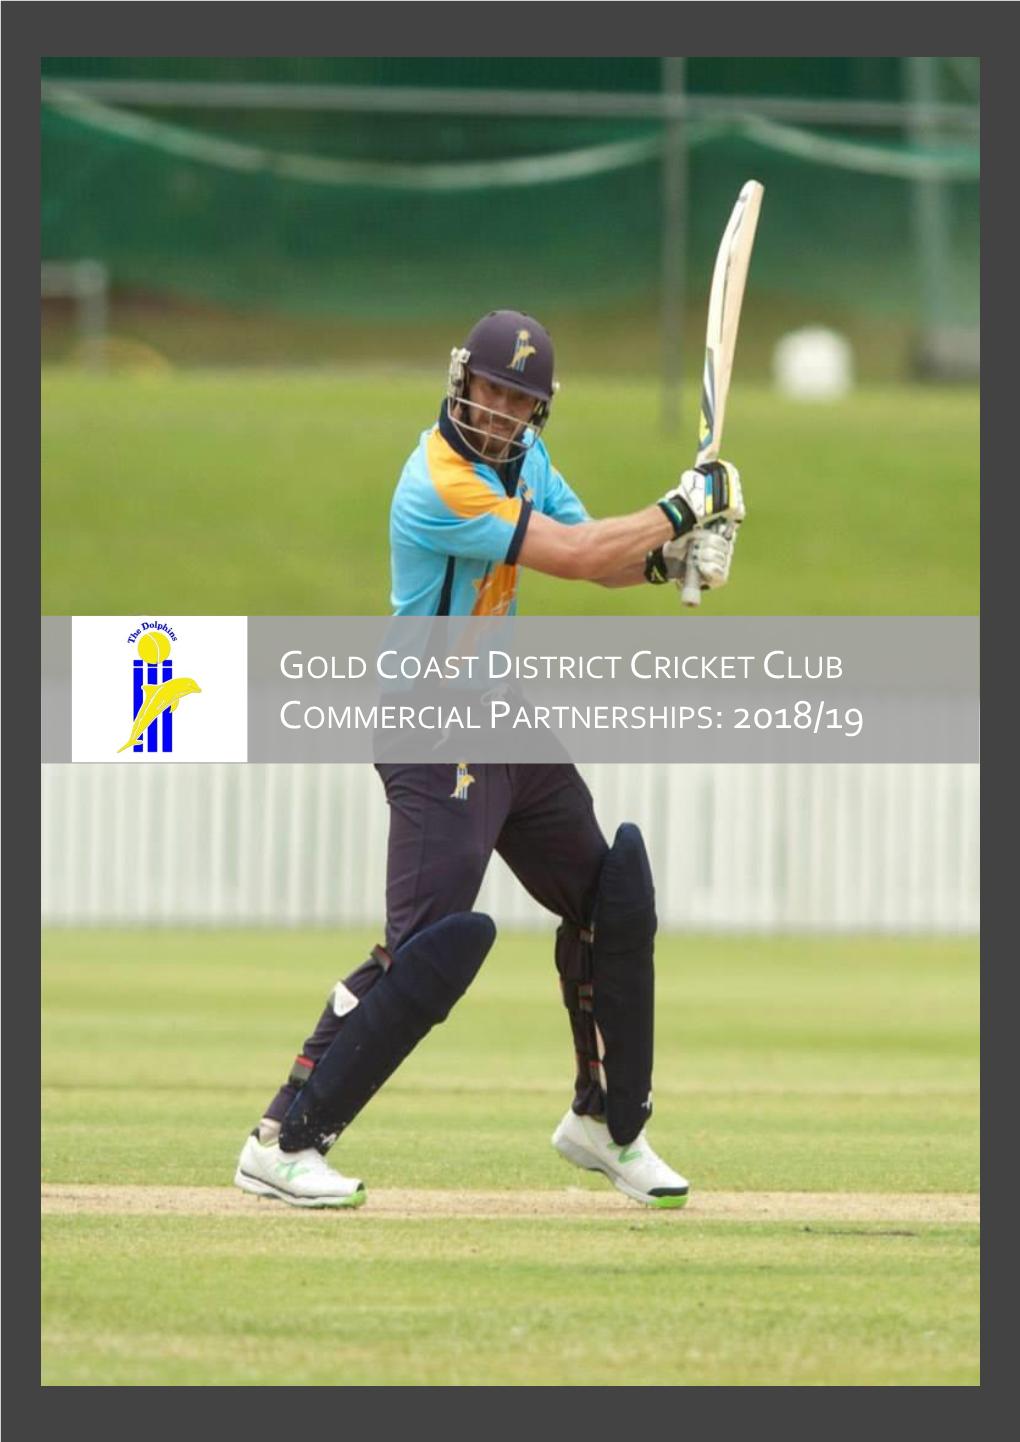 Gold Coast District Cricket Club Commercial Partnerships: 2018/19